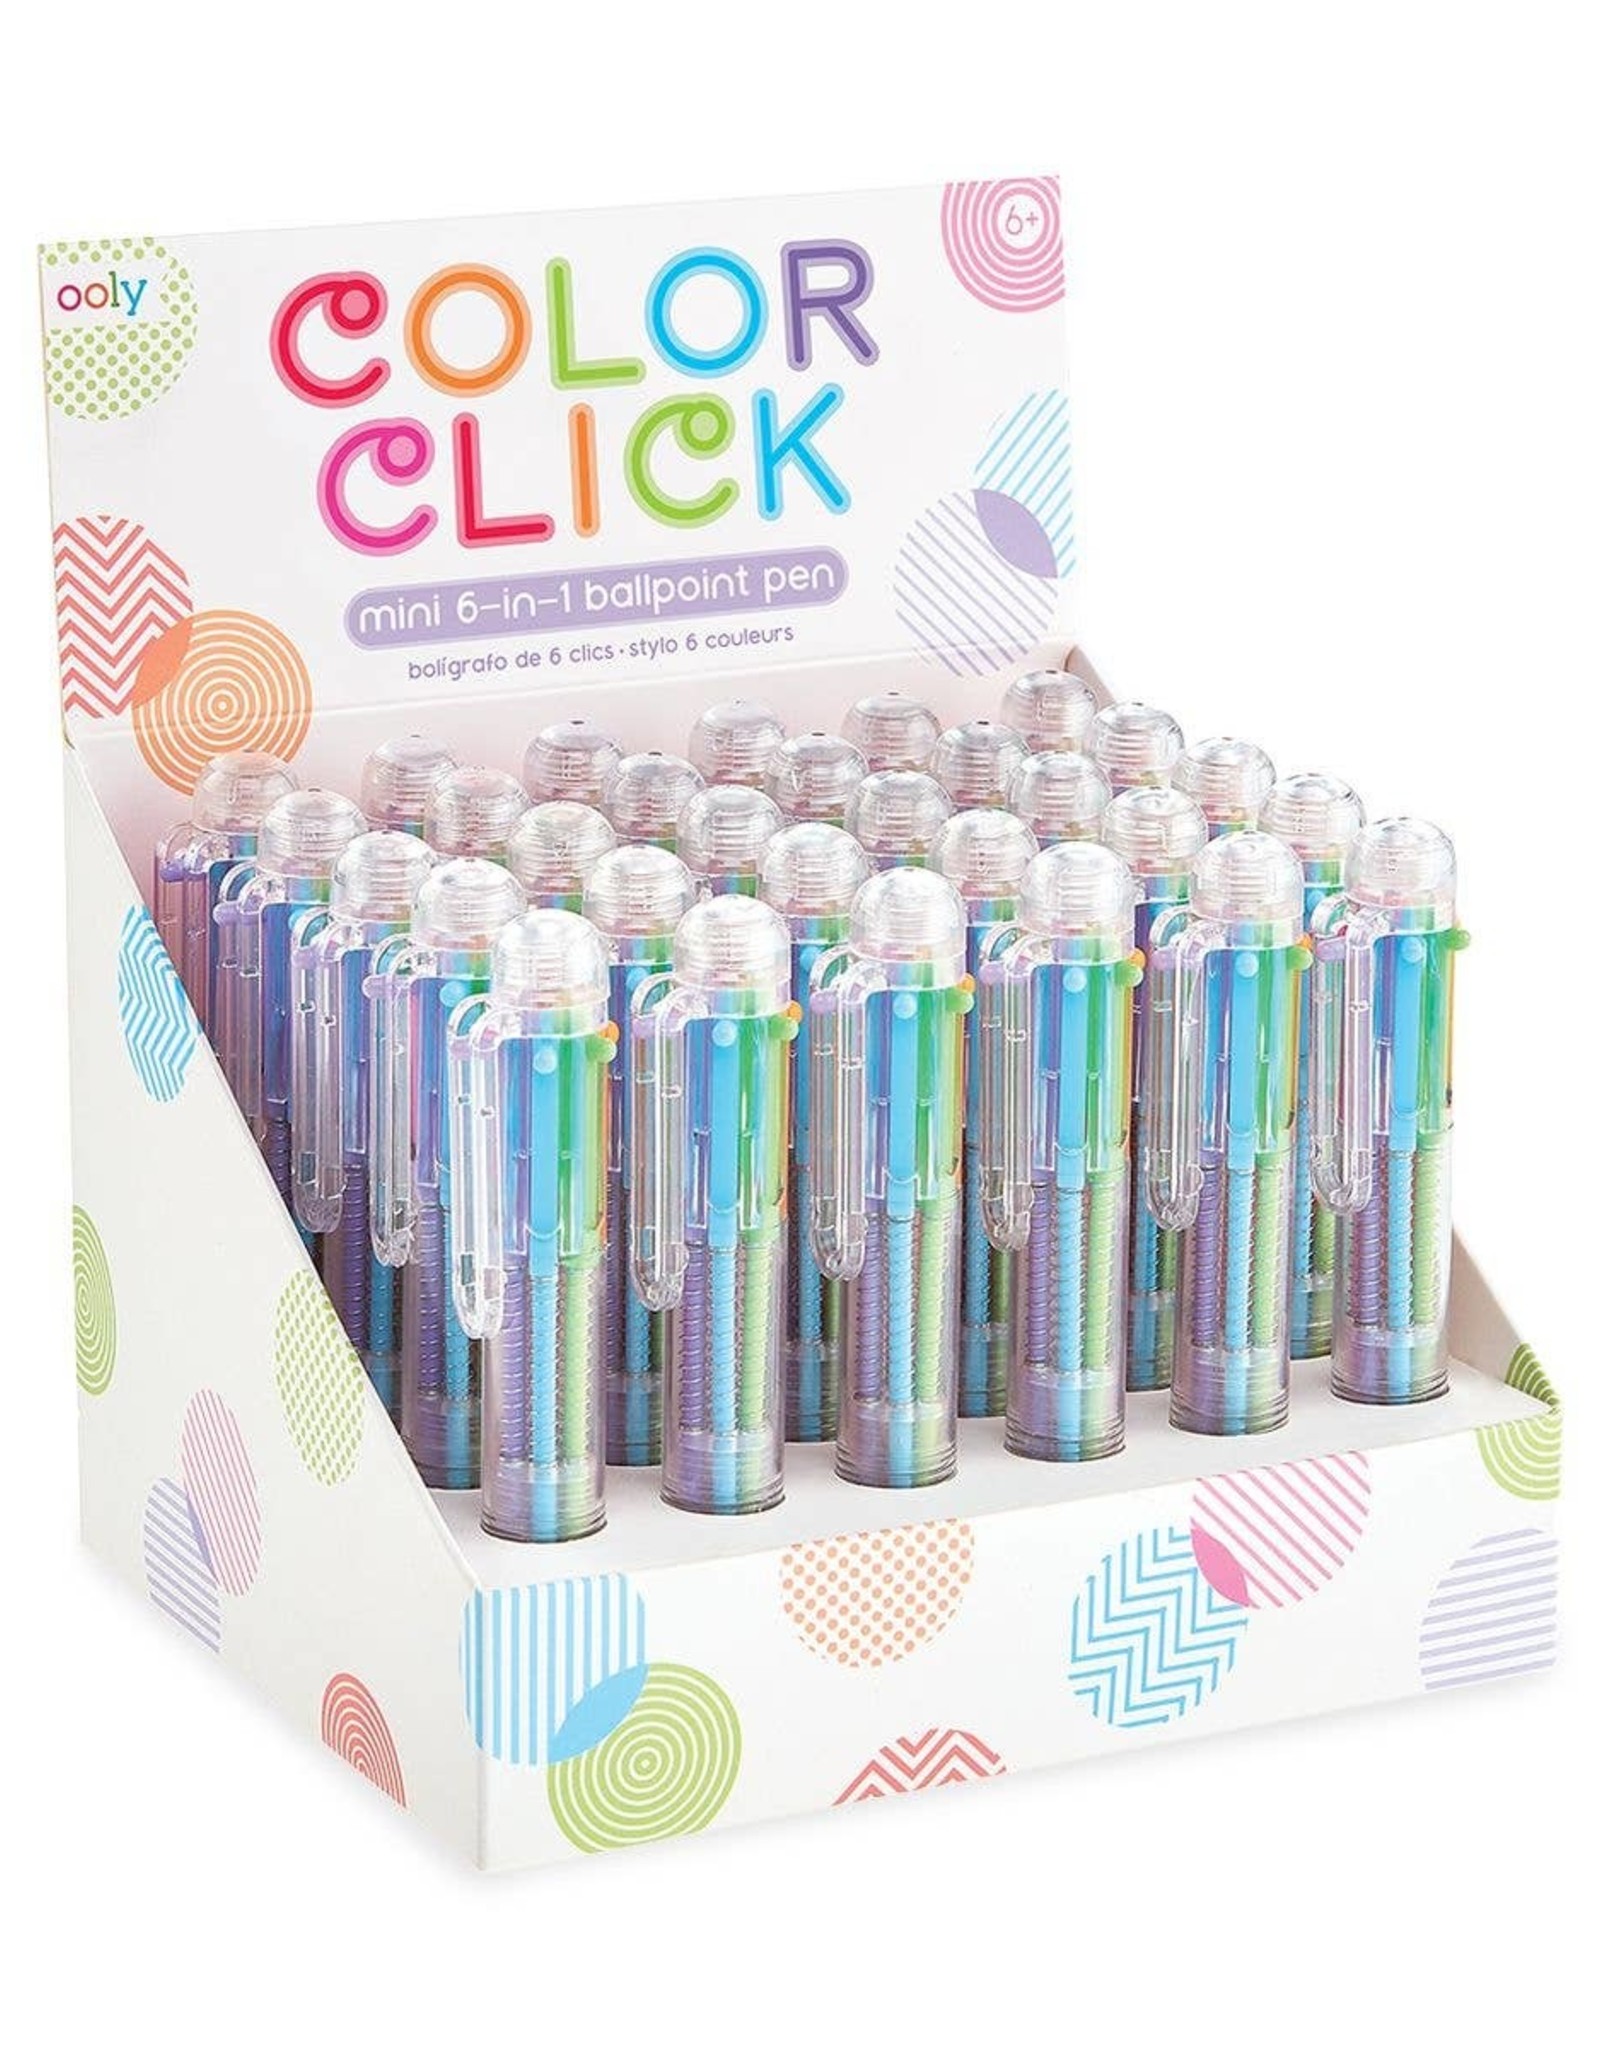 Ooly Color Click Mini 6-in-1 Colored Ballpoint Pen